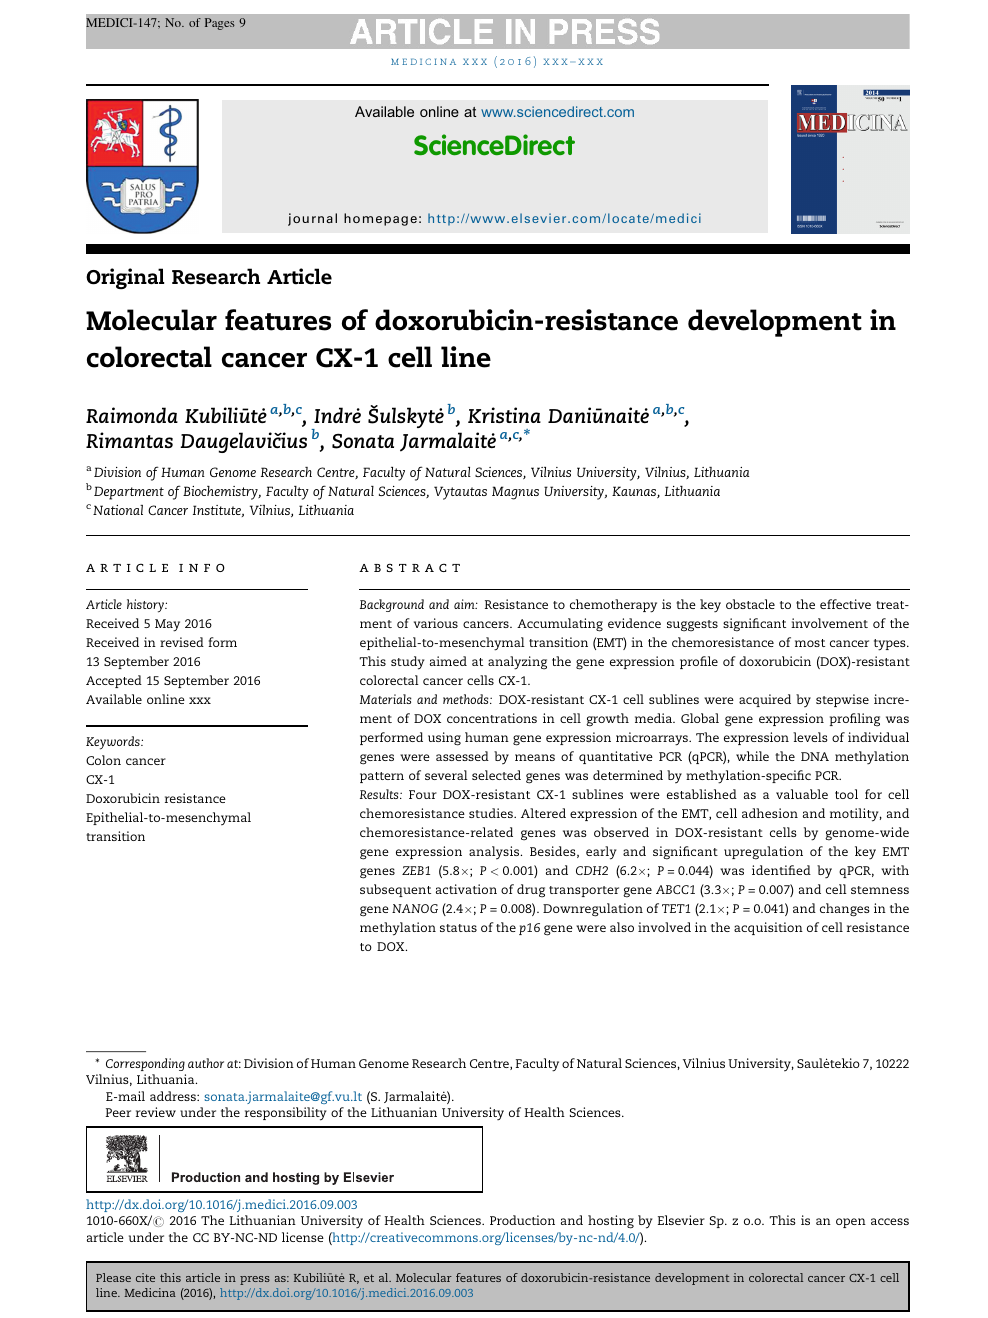 Molecular Features Of Doxorubicin Resistance Development In Colorectal Cancer Cx 1 Cell Line Topic Of Research Paper In Biological Sciences Download Scholarly Article Pdf And Read For Free On Cyberleninka Open Science Hub